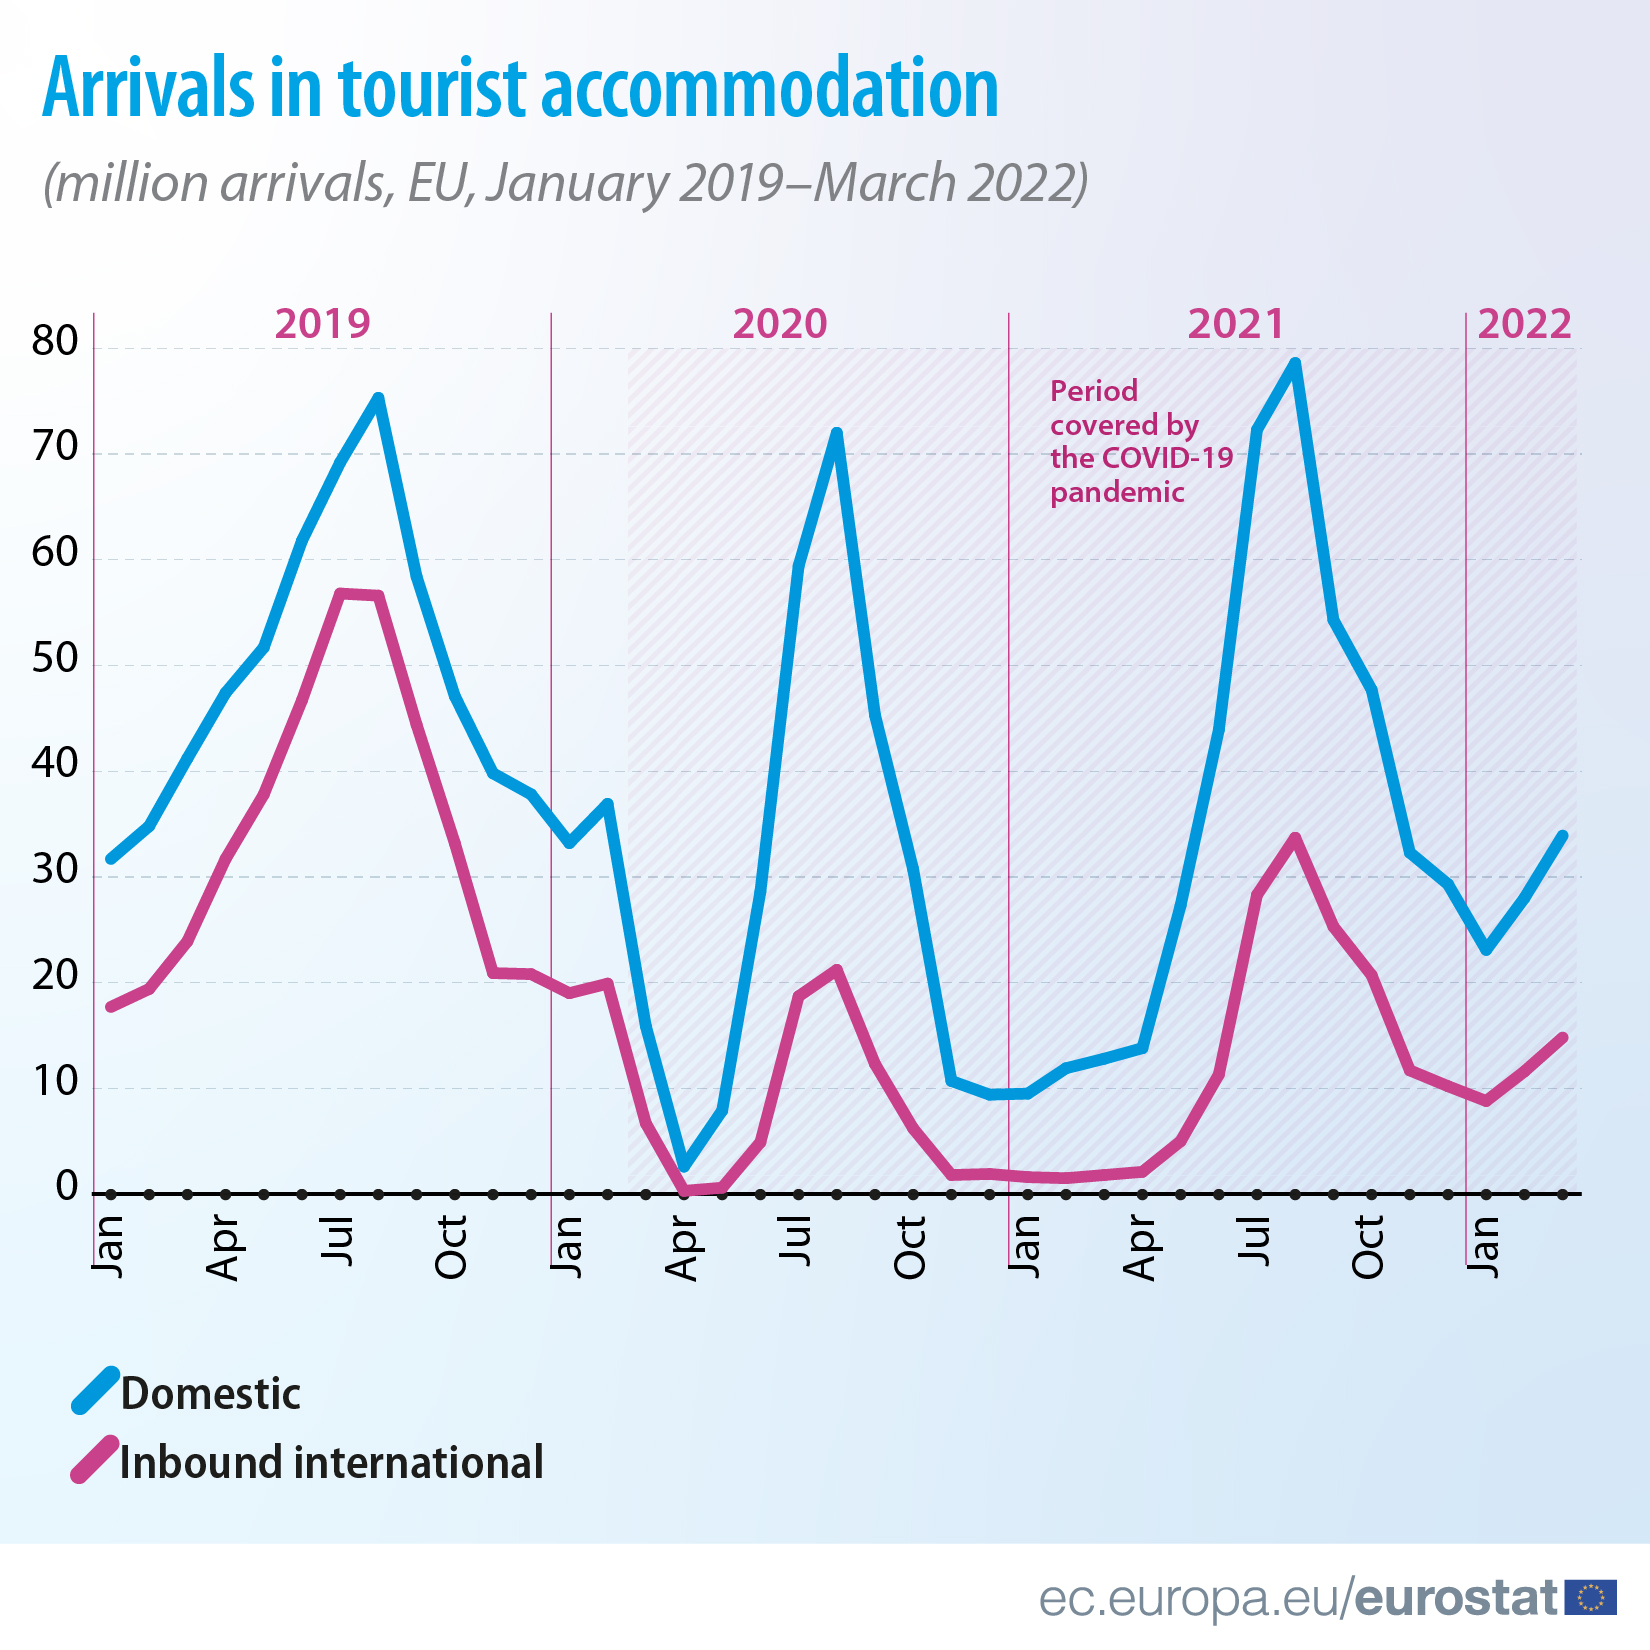 Timeline: Arrivals in tourist accommodation, domestic and inbound international (million arrivals, EU, January 2019-March 2022)